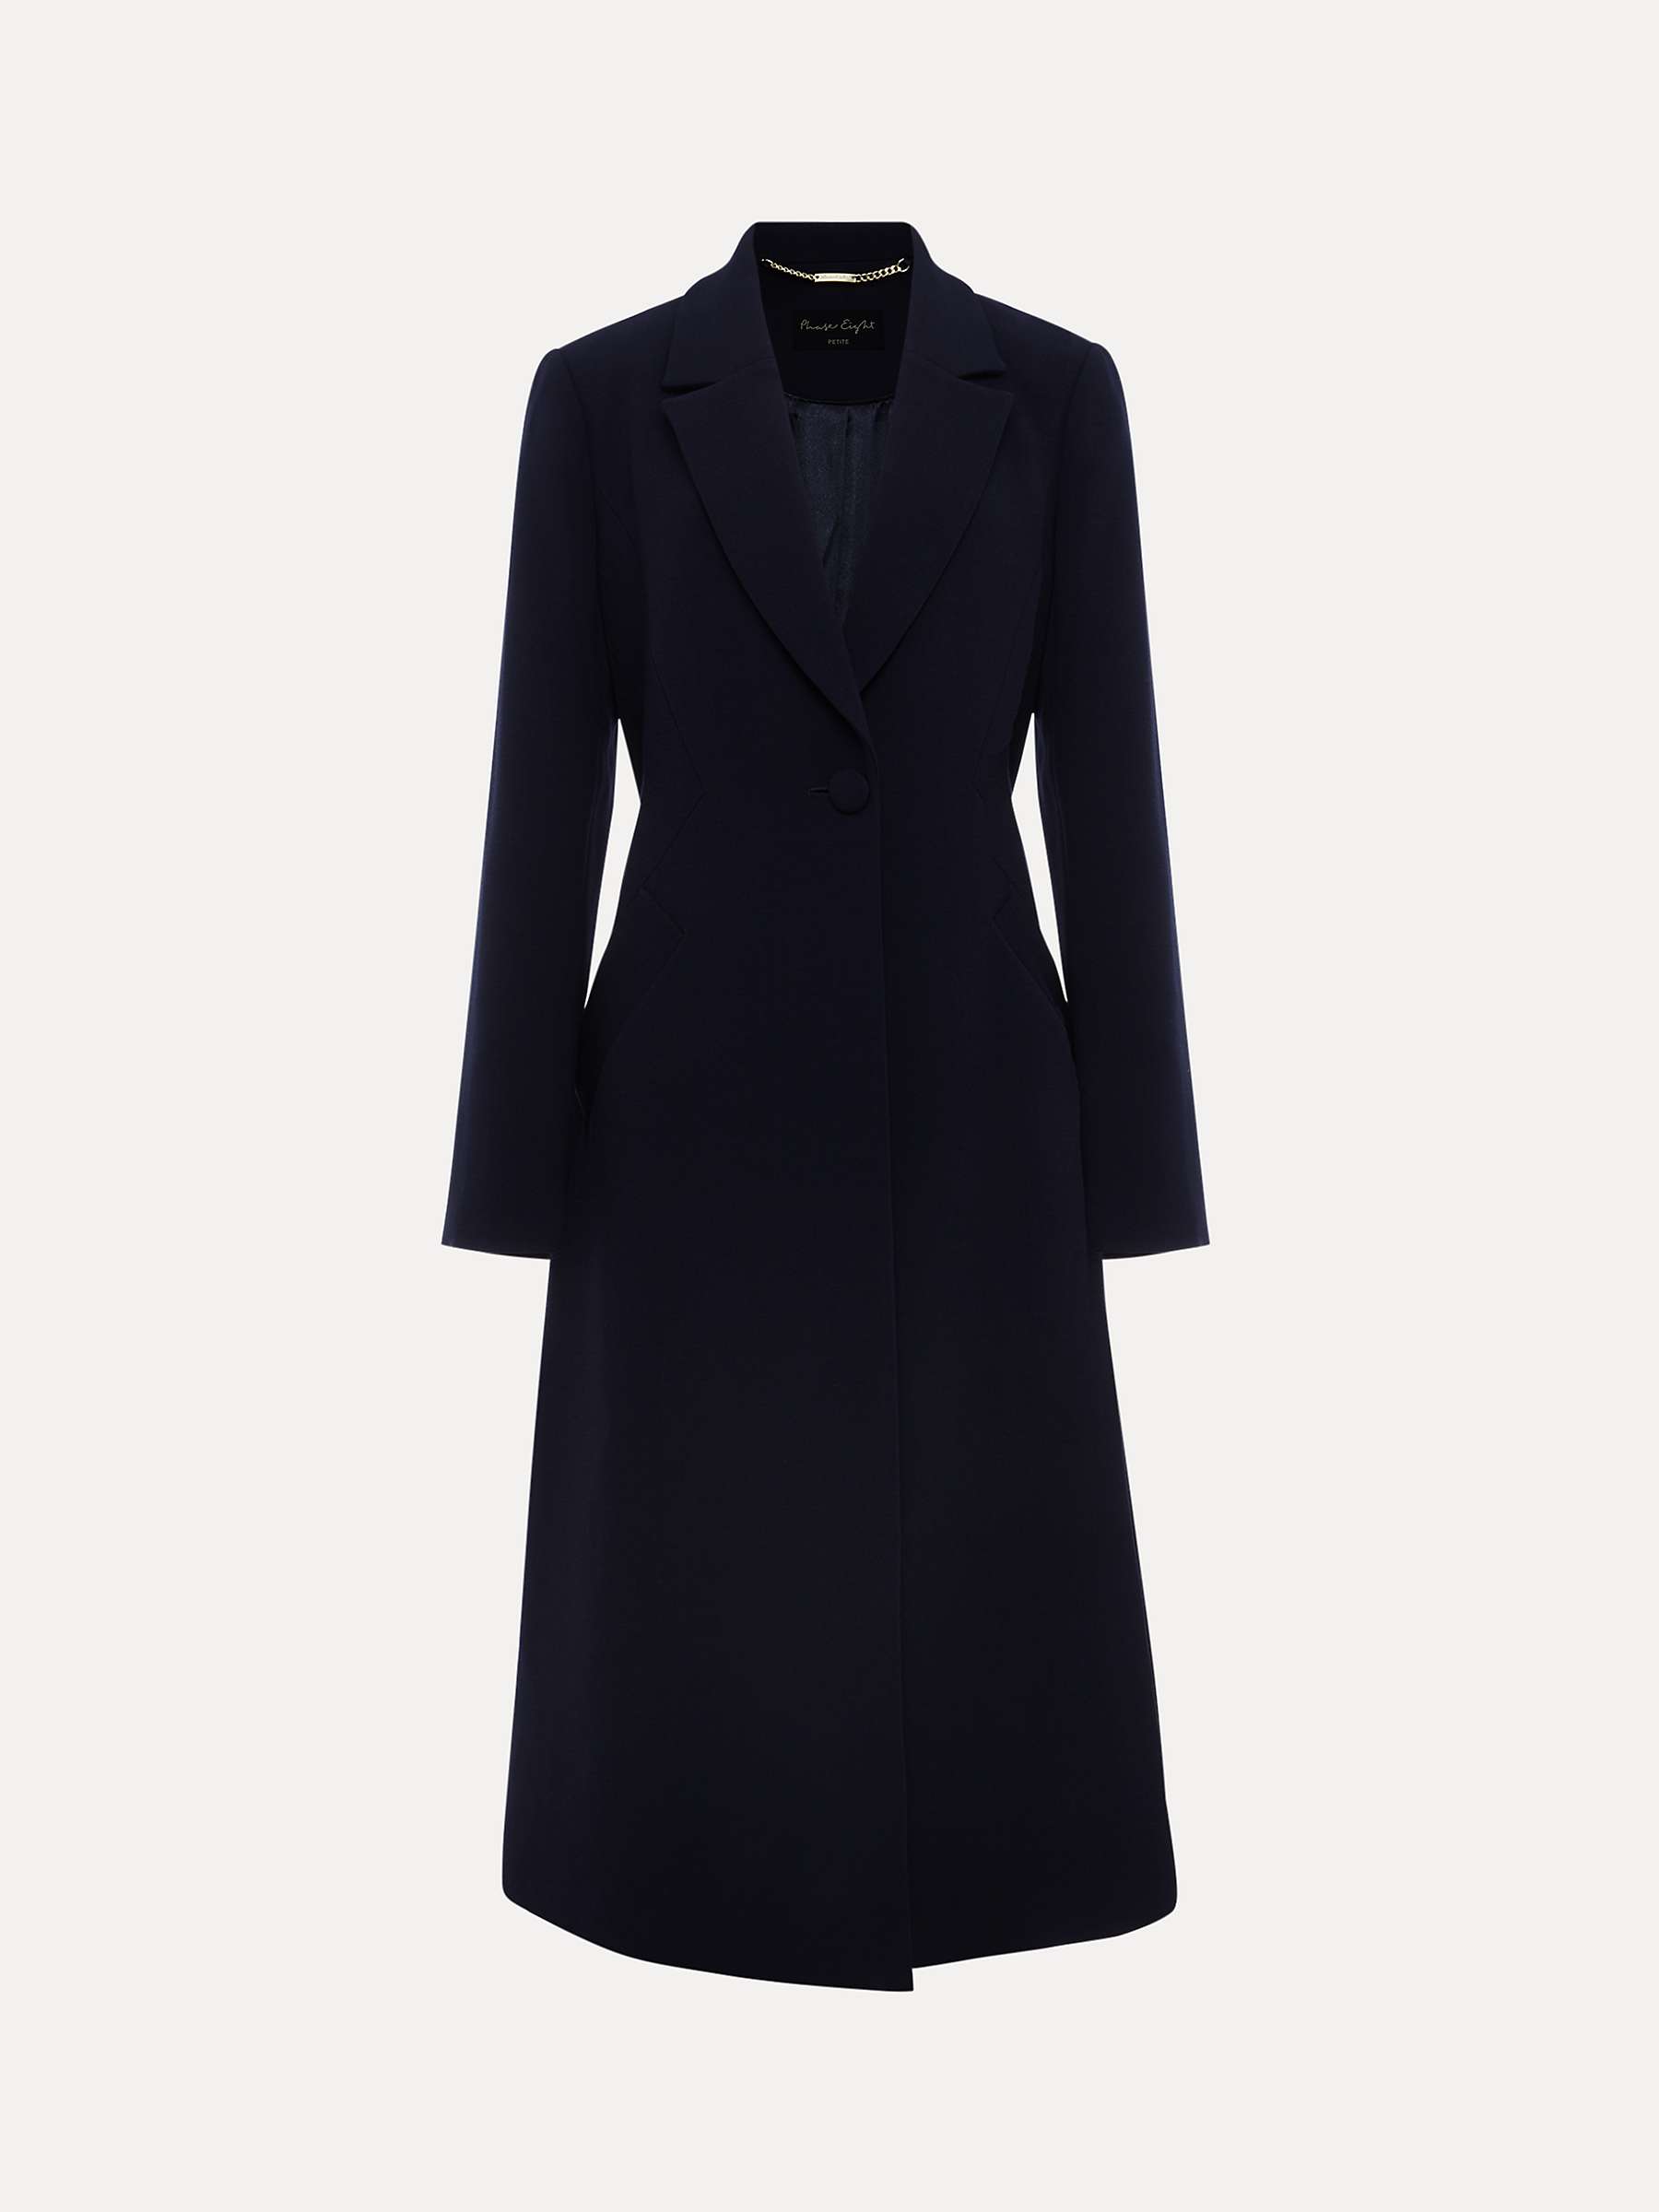 Buy Phase Eight Petite Juliette Crepe Occasion Coat, Navy Online at johnlewis.com